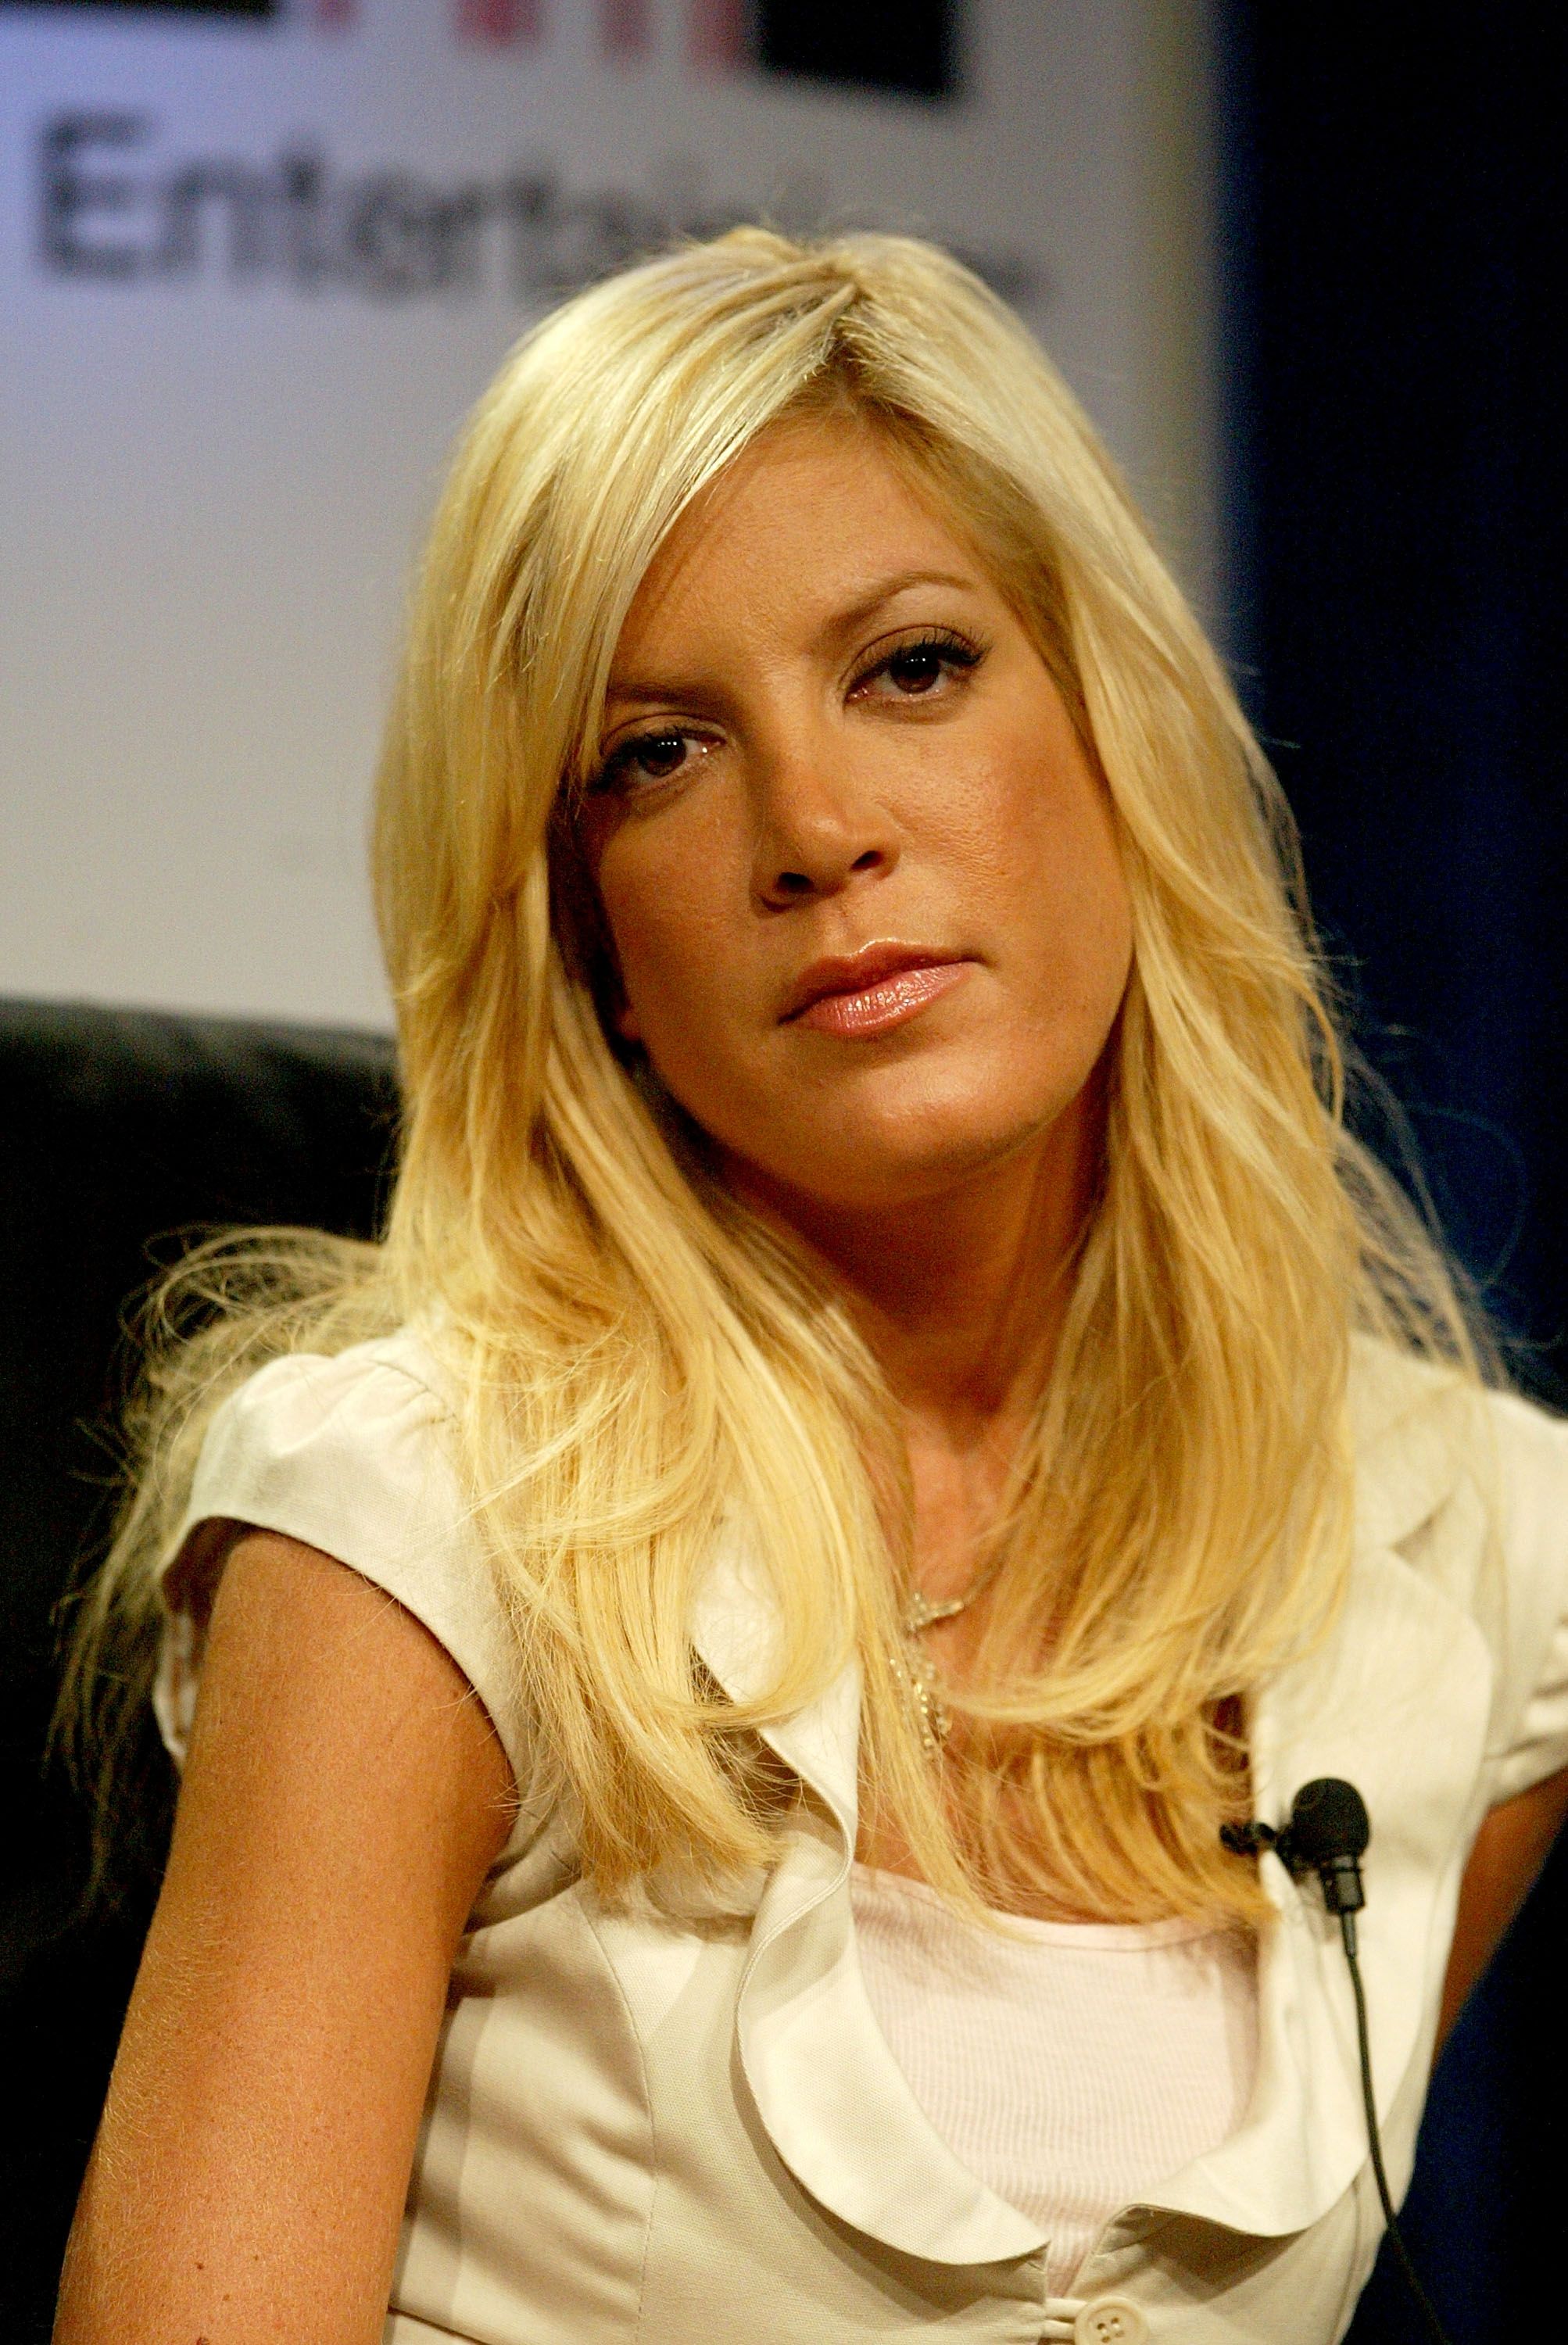 L'actrice Tori Spelling, le 14 juillet 2005 à Beverly Hills, Californie. | Photo : Getty Images